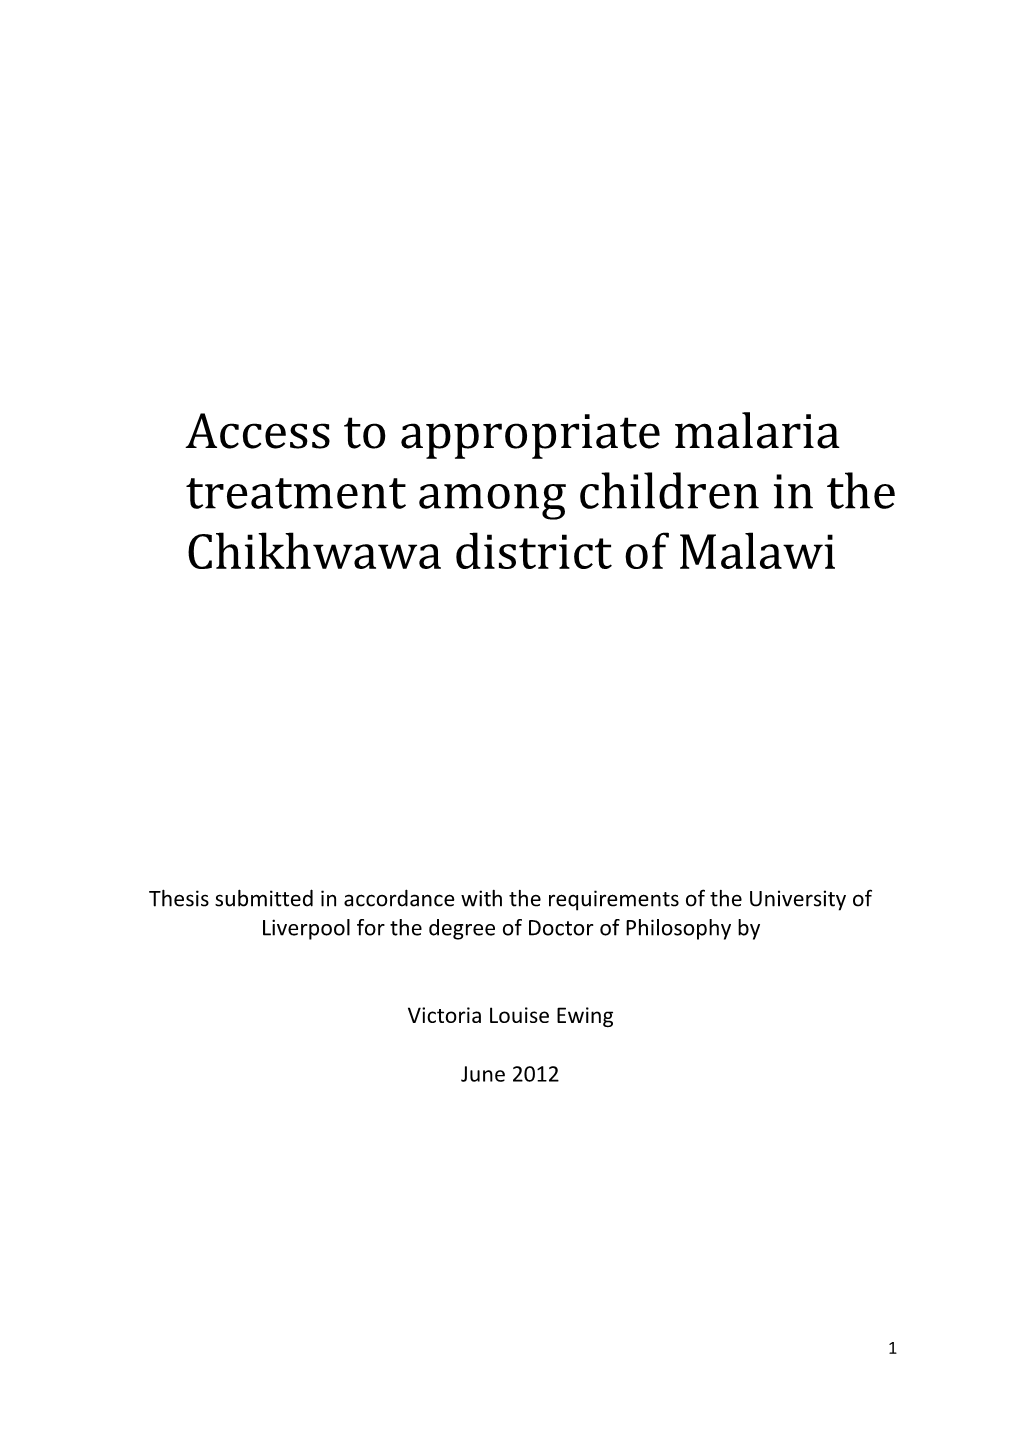 Access to Appropriate Malaria Treatment Among Children in the Chikhwawa District of Malawi